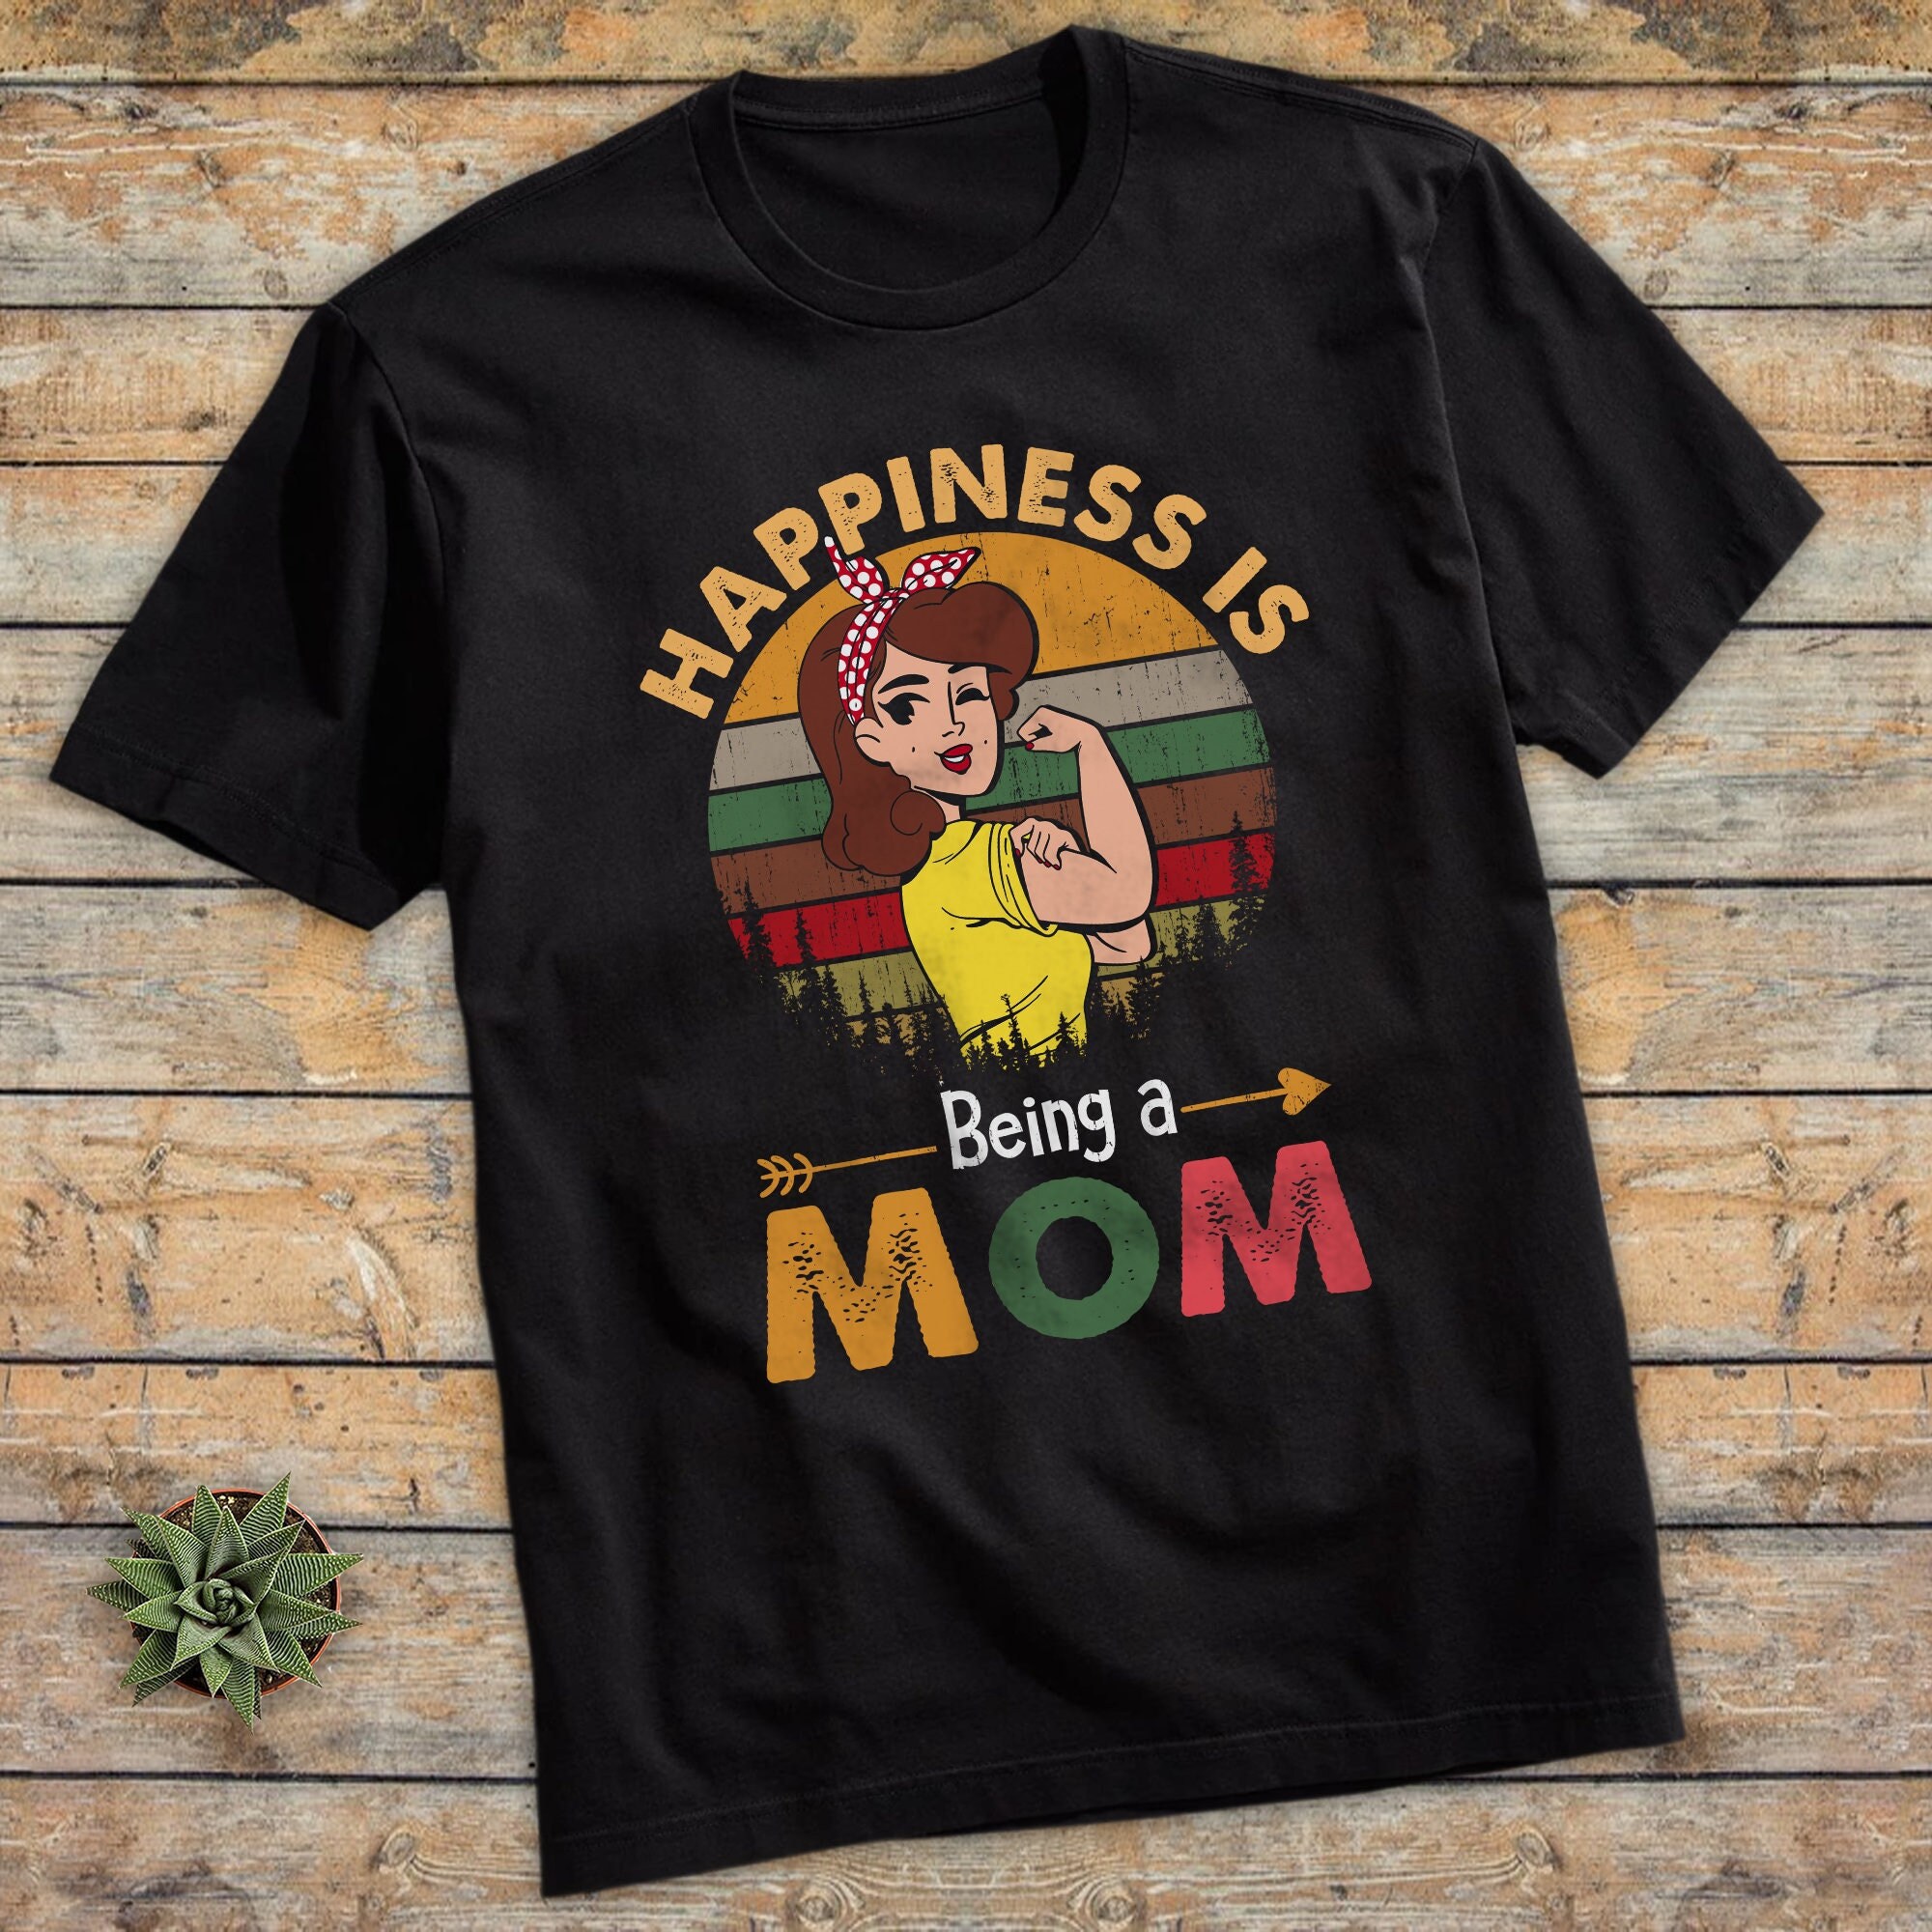 Mothers Day Gifts Best Mama Ever Shirt Best Mom Shirt New Mom Tee Mommy T-Shirt Mom Gift From Husband Cute Mom TShirt Gift For Mother